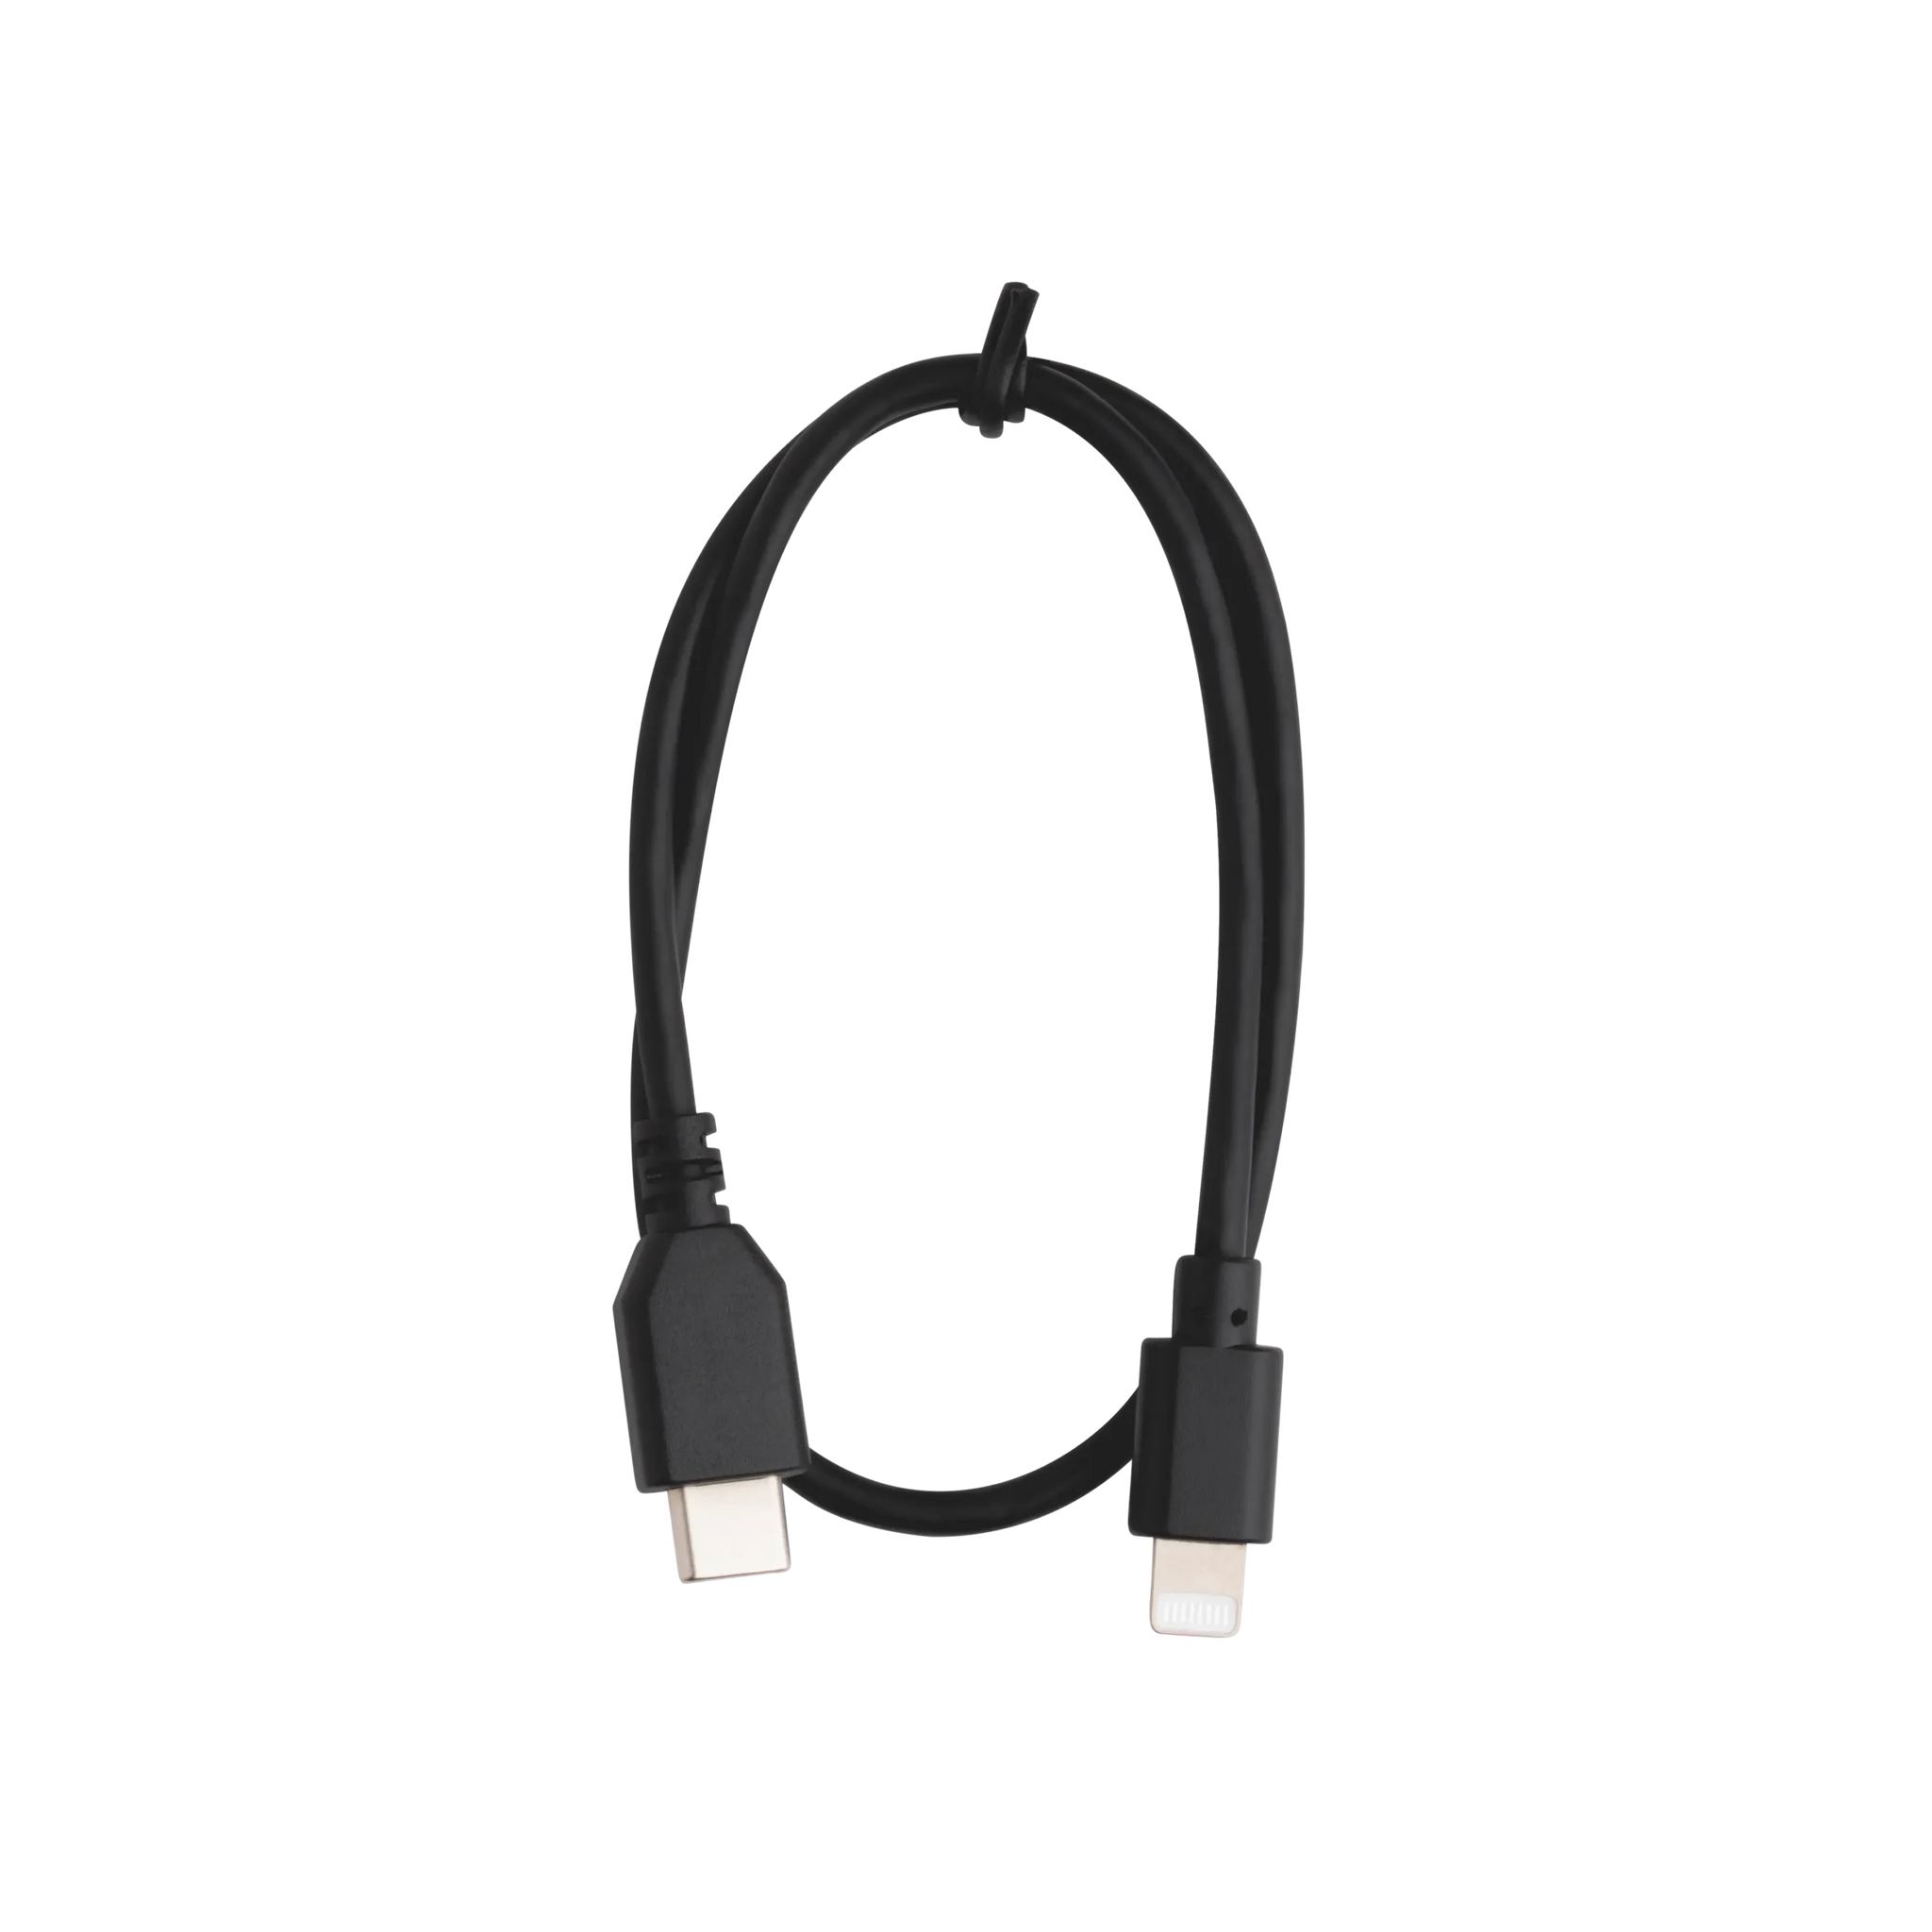 Shure USB-C to Lightning Cable